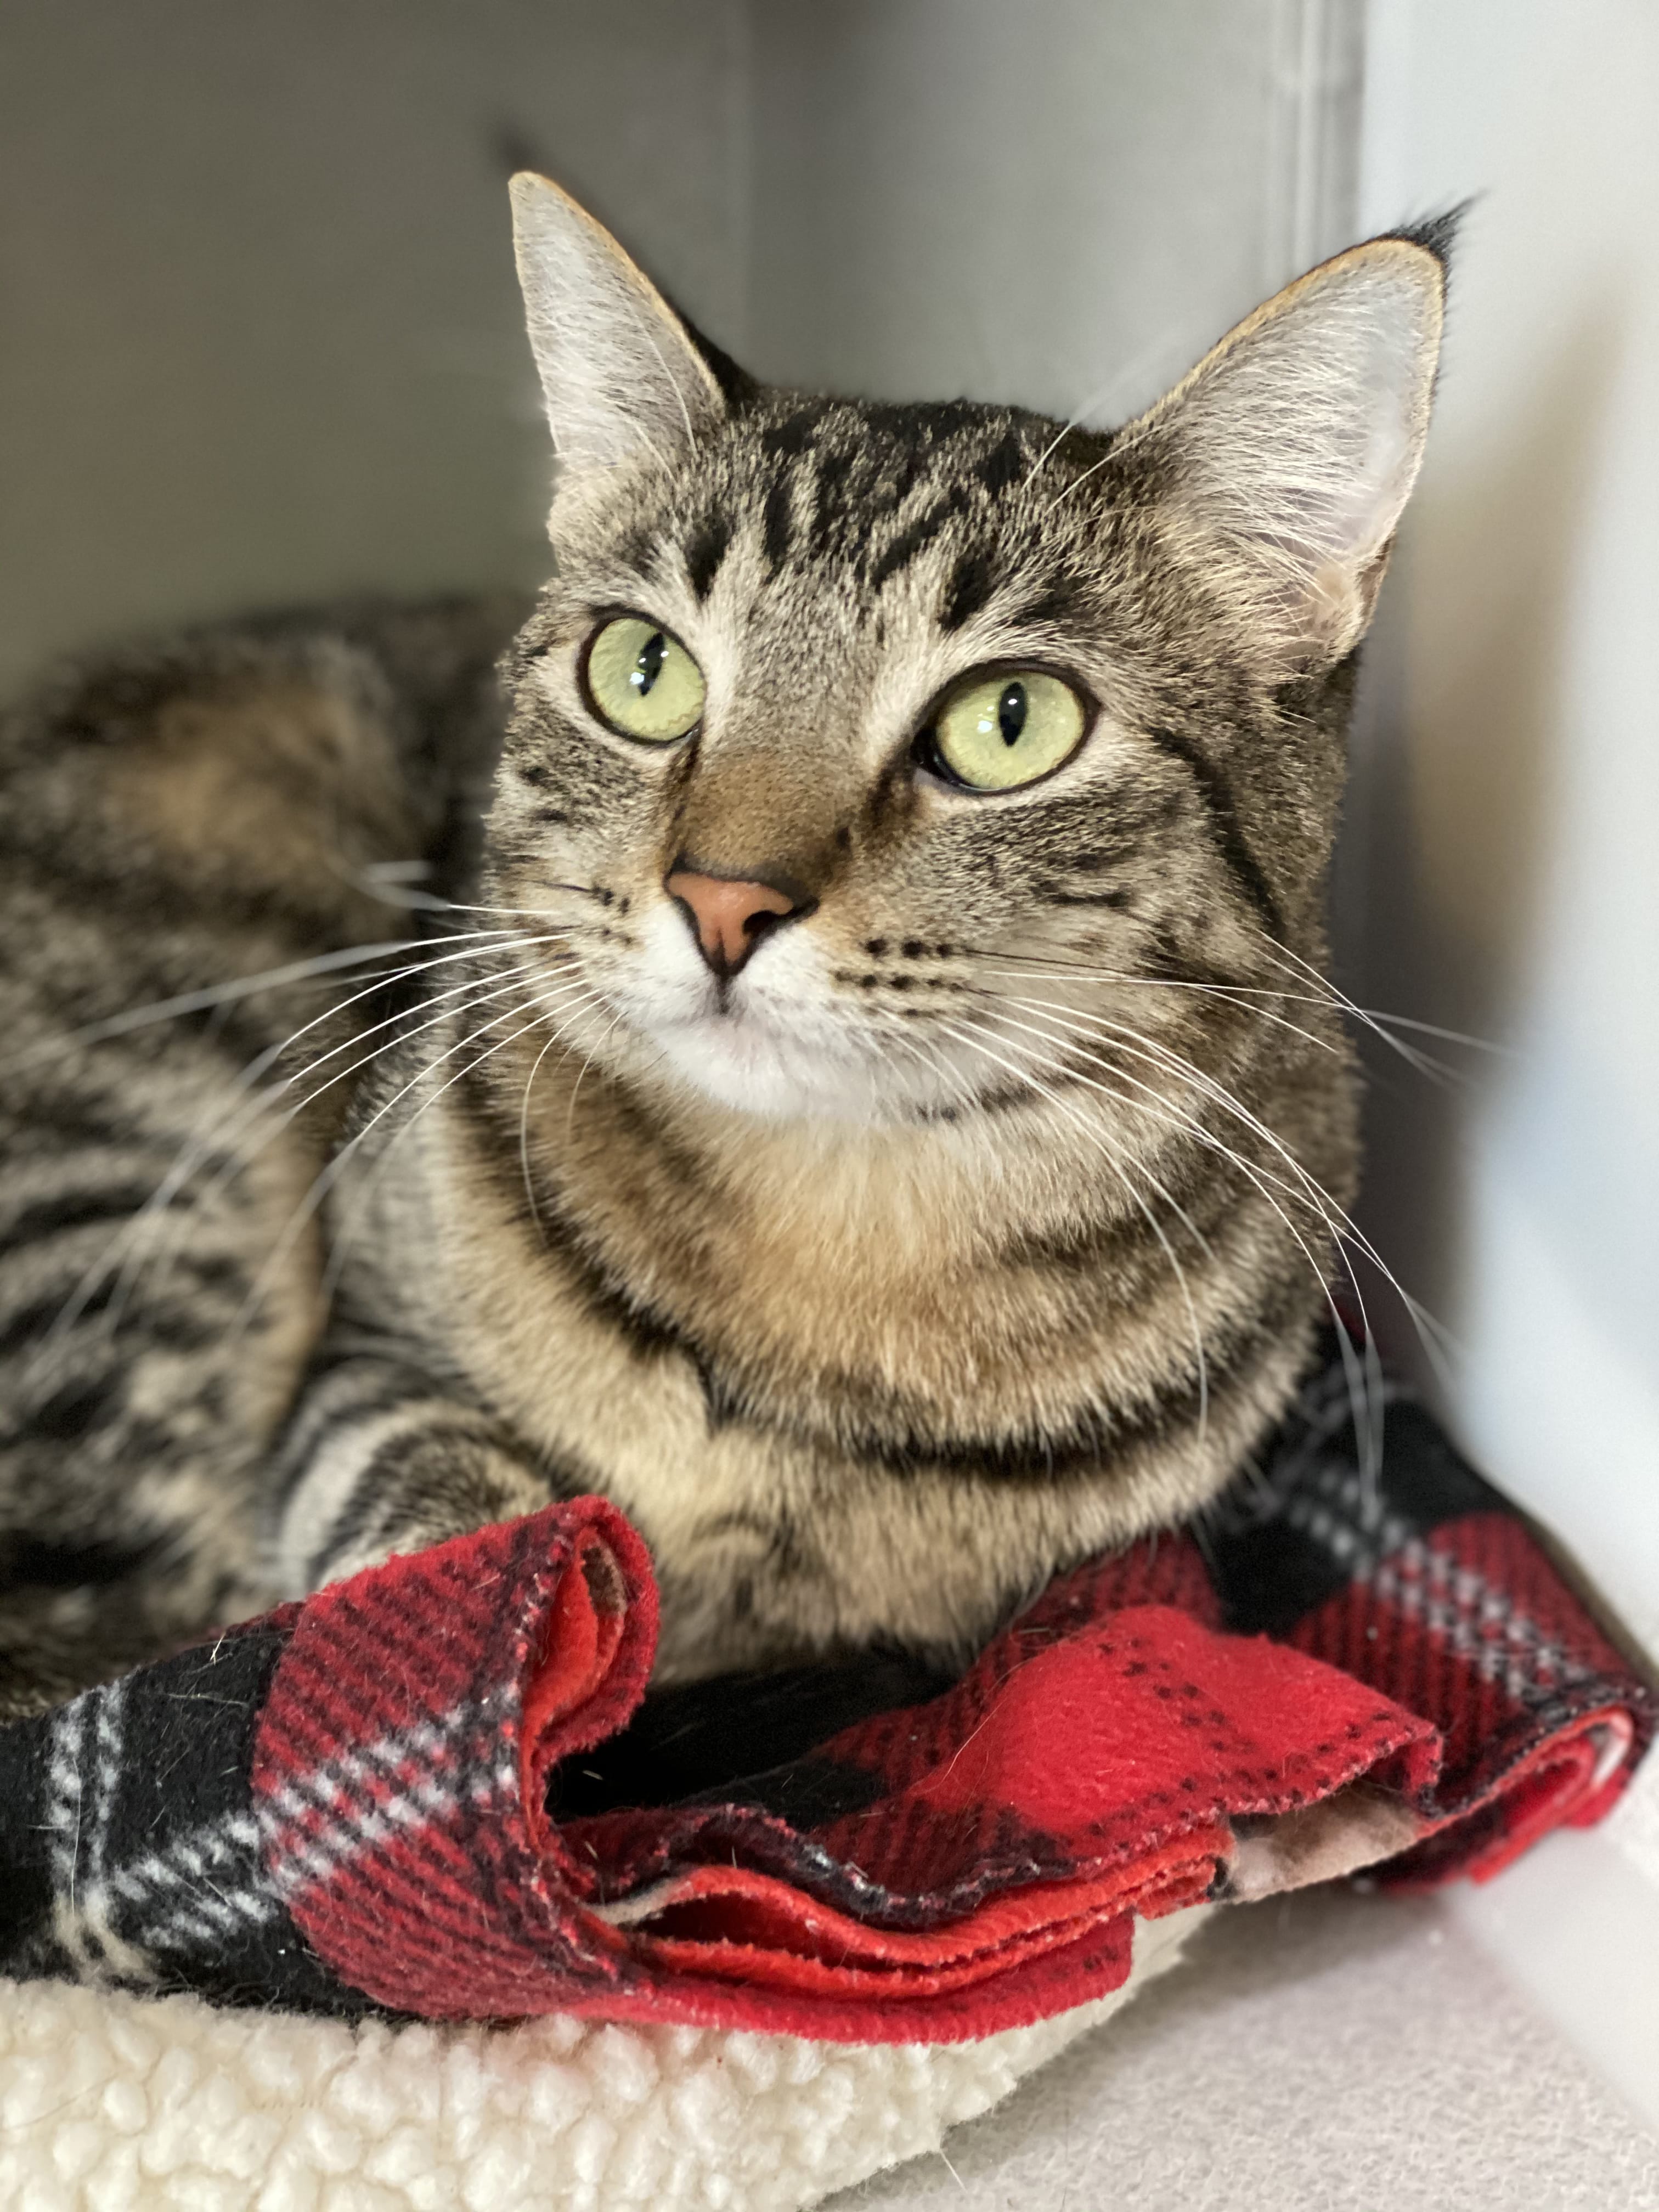 Say hello to Fox! With her silky soft coat and beautiful tabby markings, she’s one foxy lady. And just look at those cute little ear tufts! She’s shy in the shelter but super sweet and has a ready purr. We know she’ll thrive in a loving home.